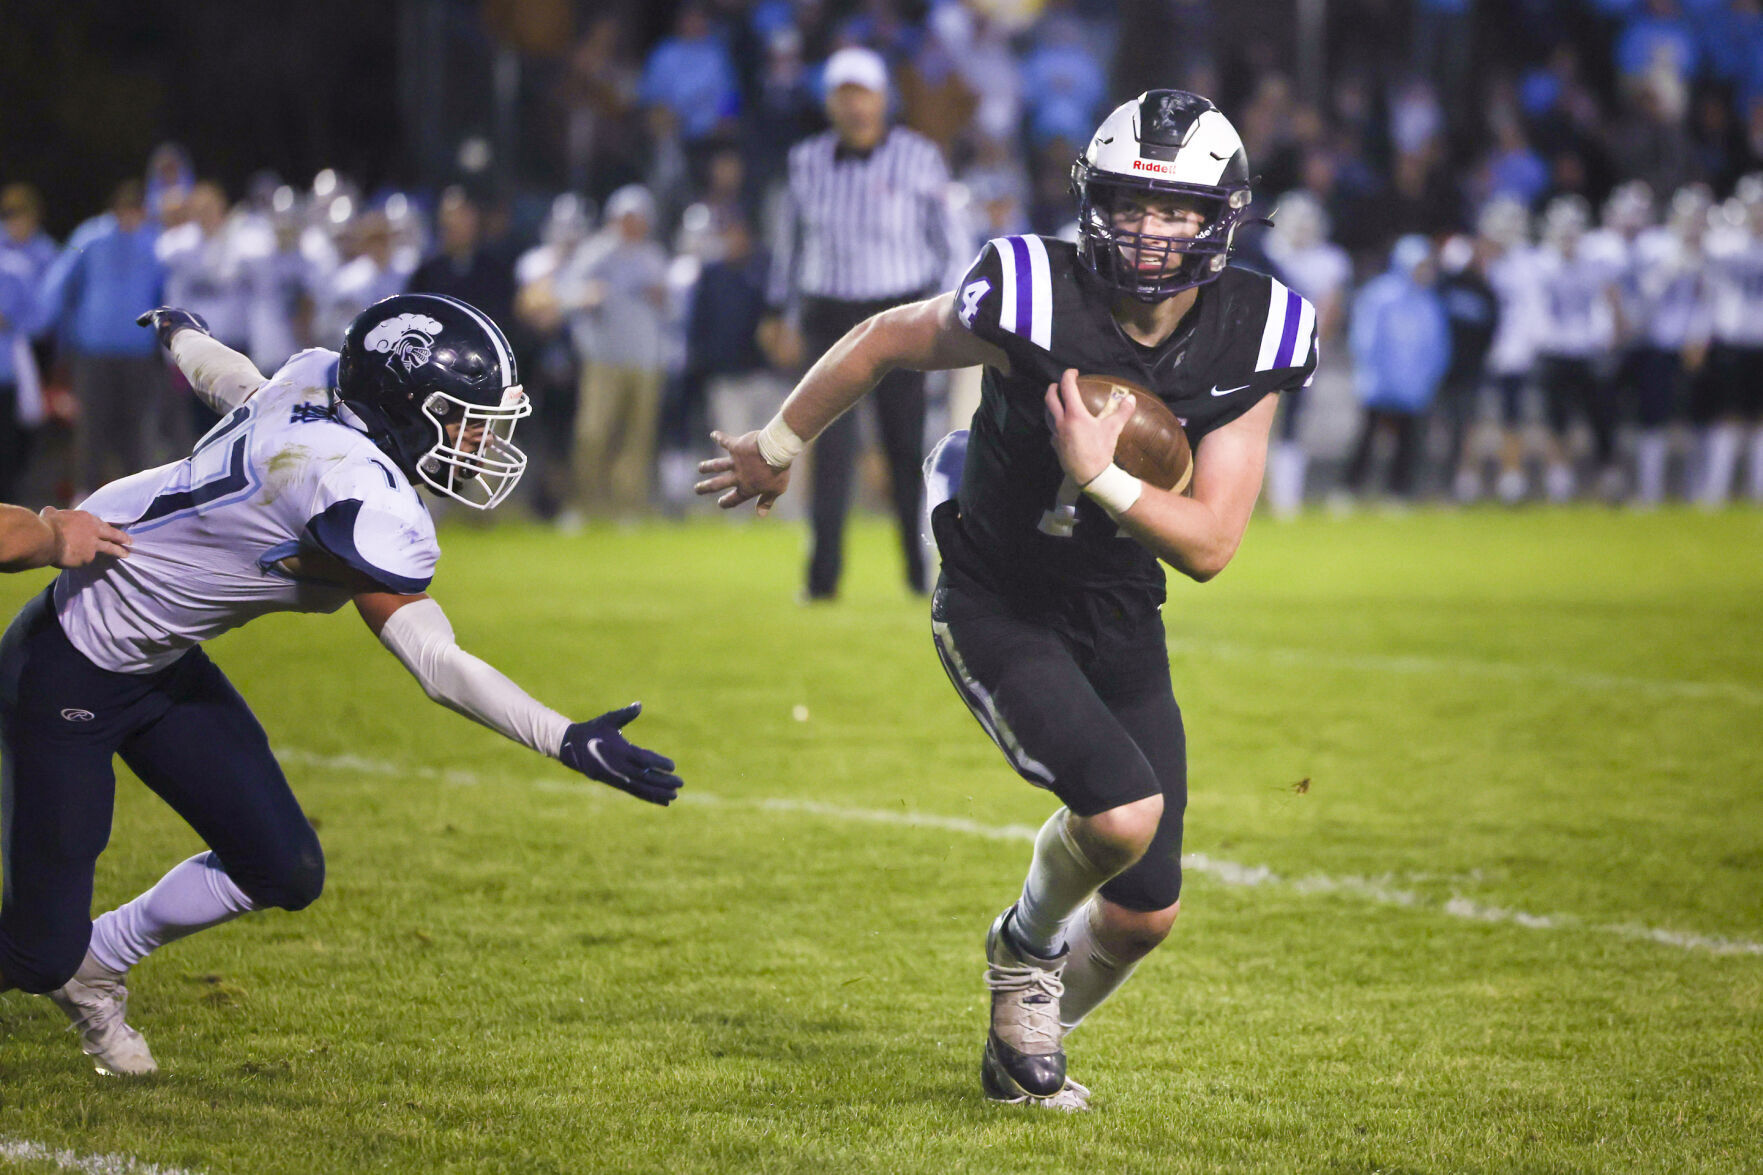 Shelbyville football advances to fourth semifinals in school history